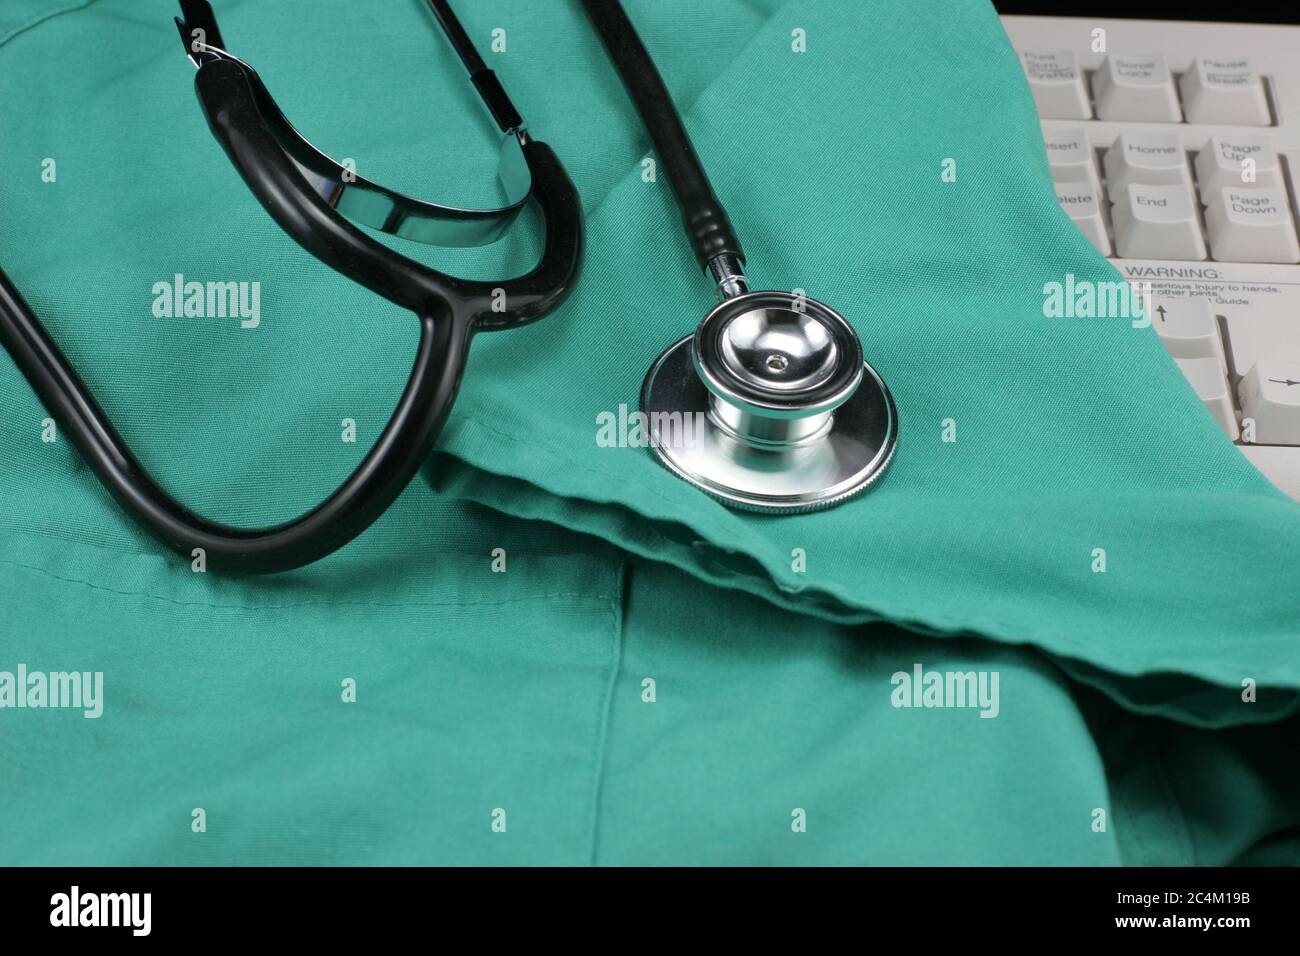 Medical stethoscope.on top of green scrubs & computer keyboard for entry of patient medical records. Stock Photo